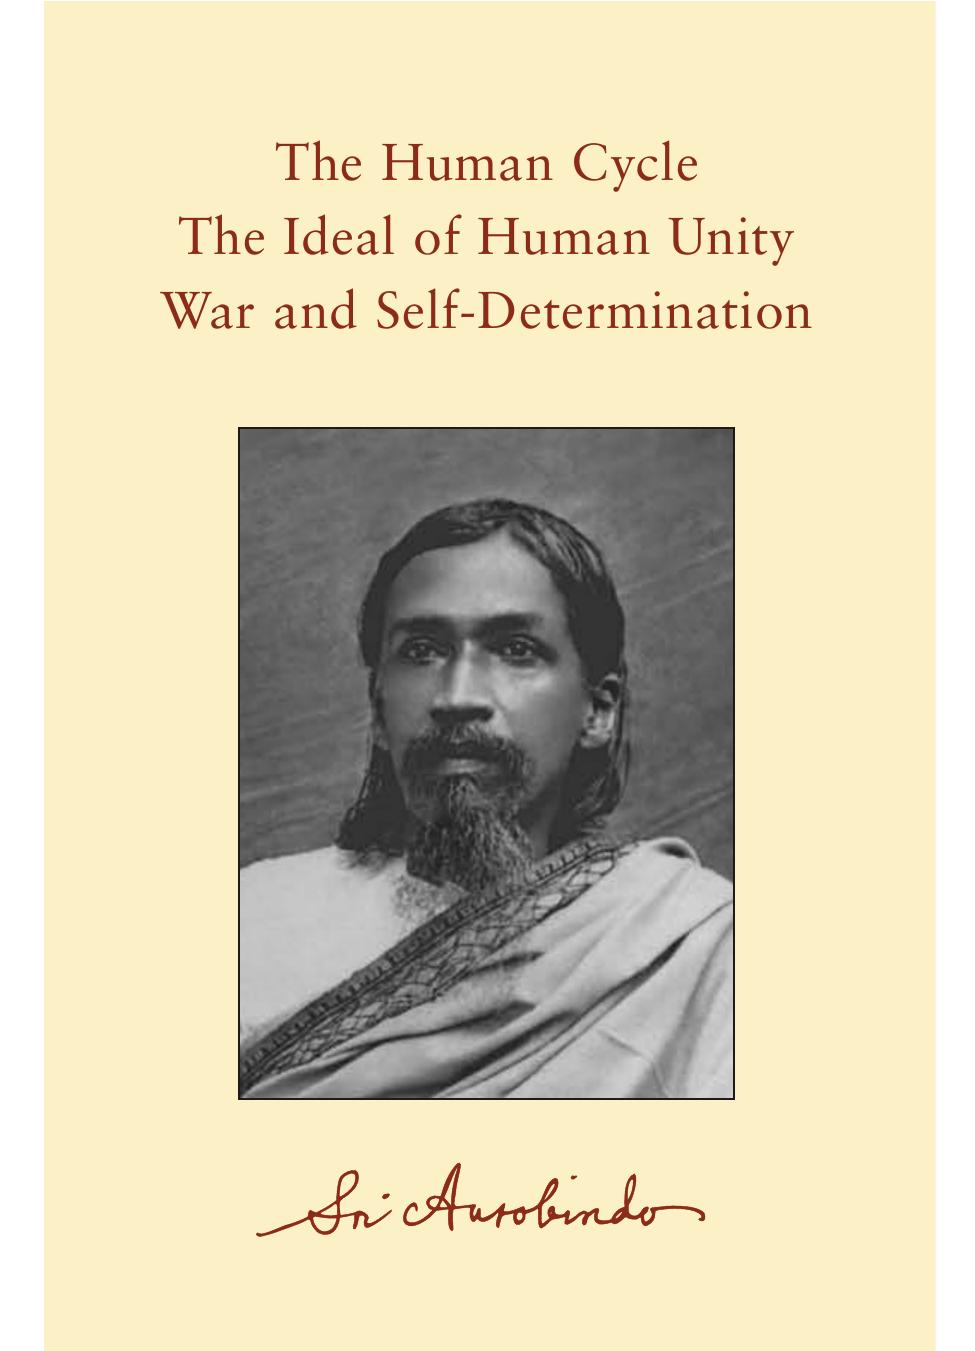 The Human Cycle—The Ideal of Human Unity—War and Self-Determination